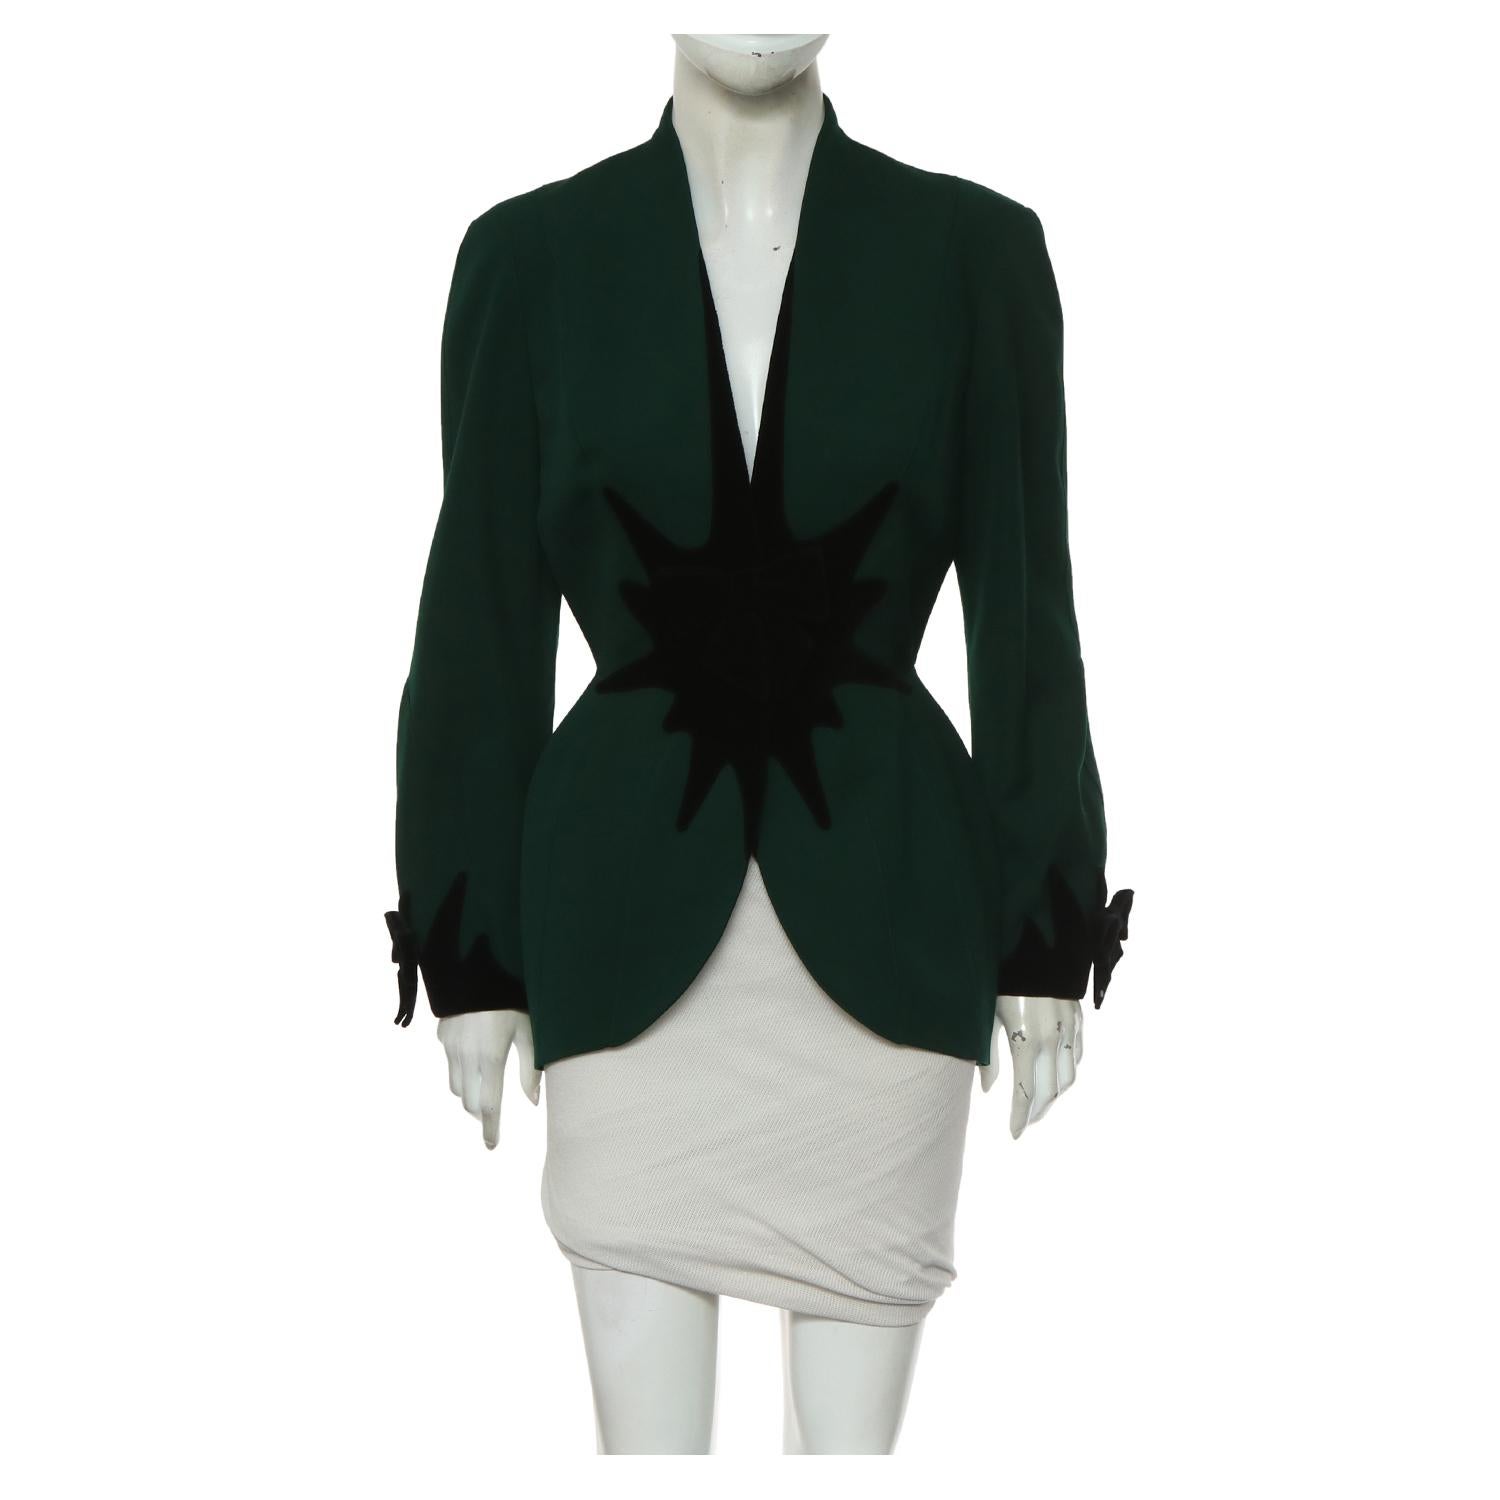 Beautiful vintage dark green Mugler Blazer with velvet bow detail. Overall still in great vintage condition, with minor white marks on the underarm area. Size 36 fits like Small.